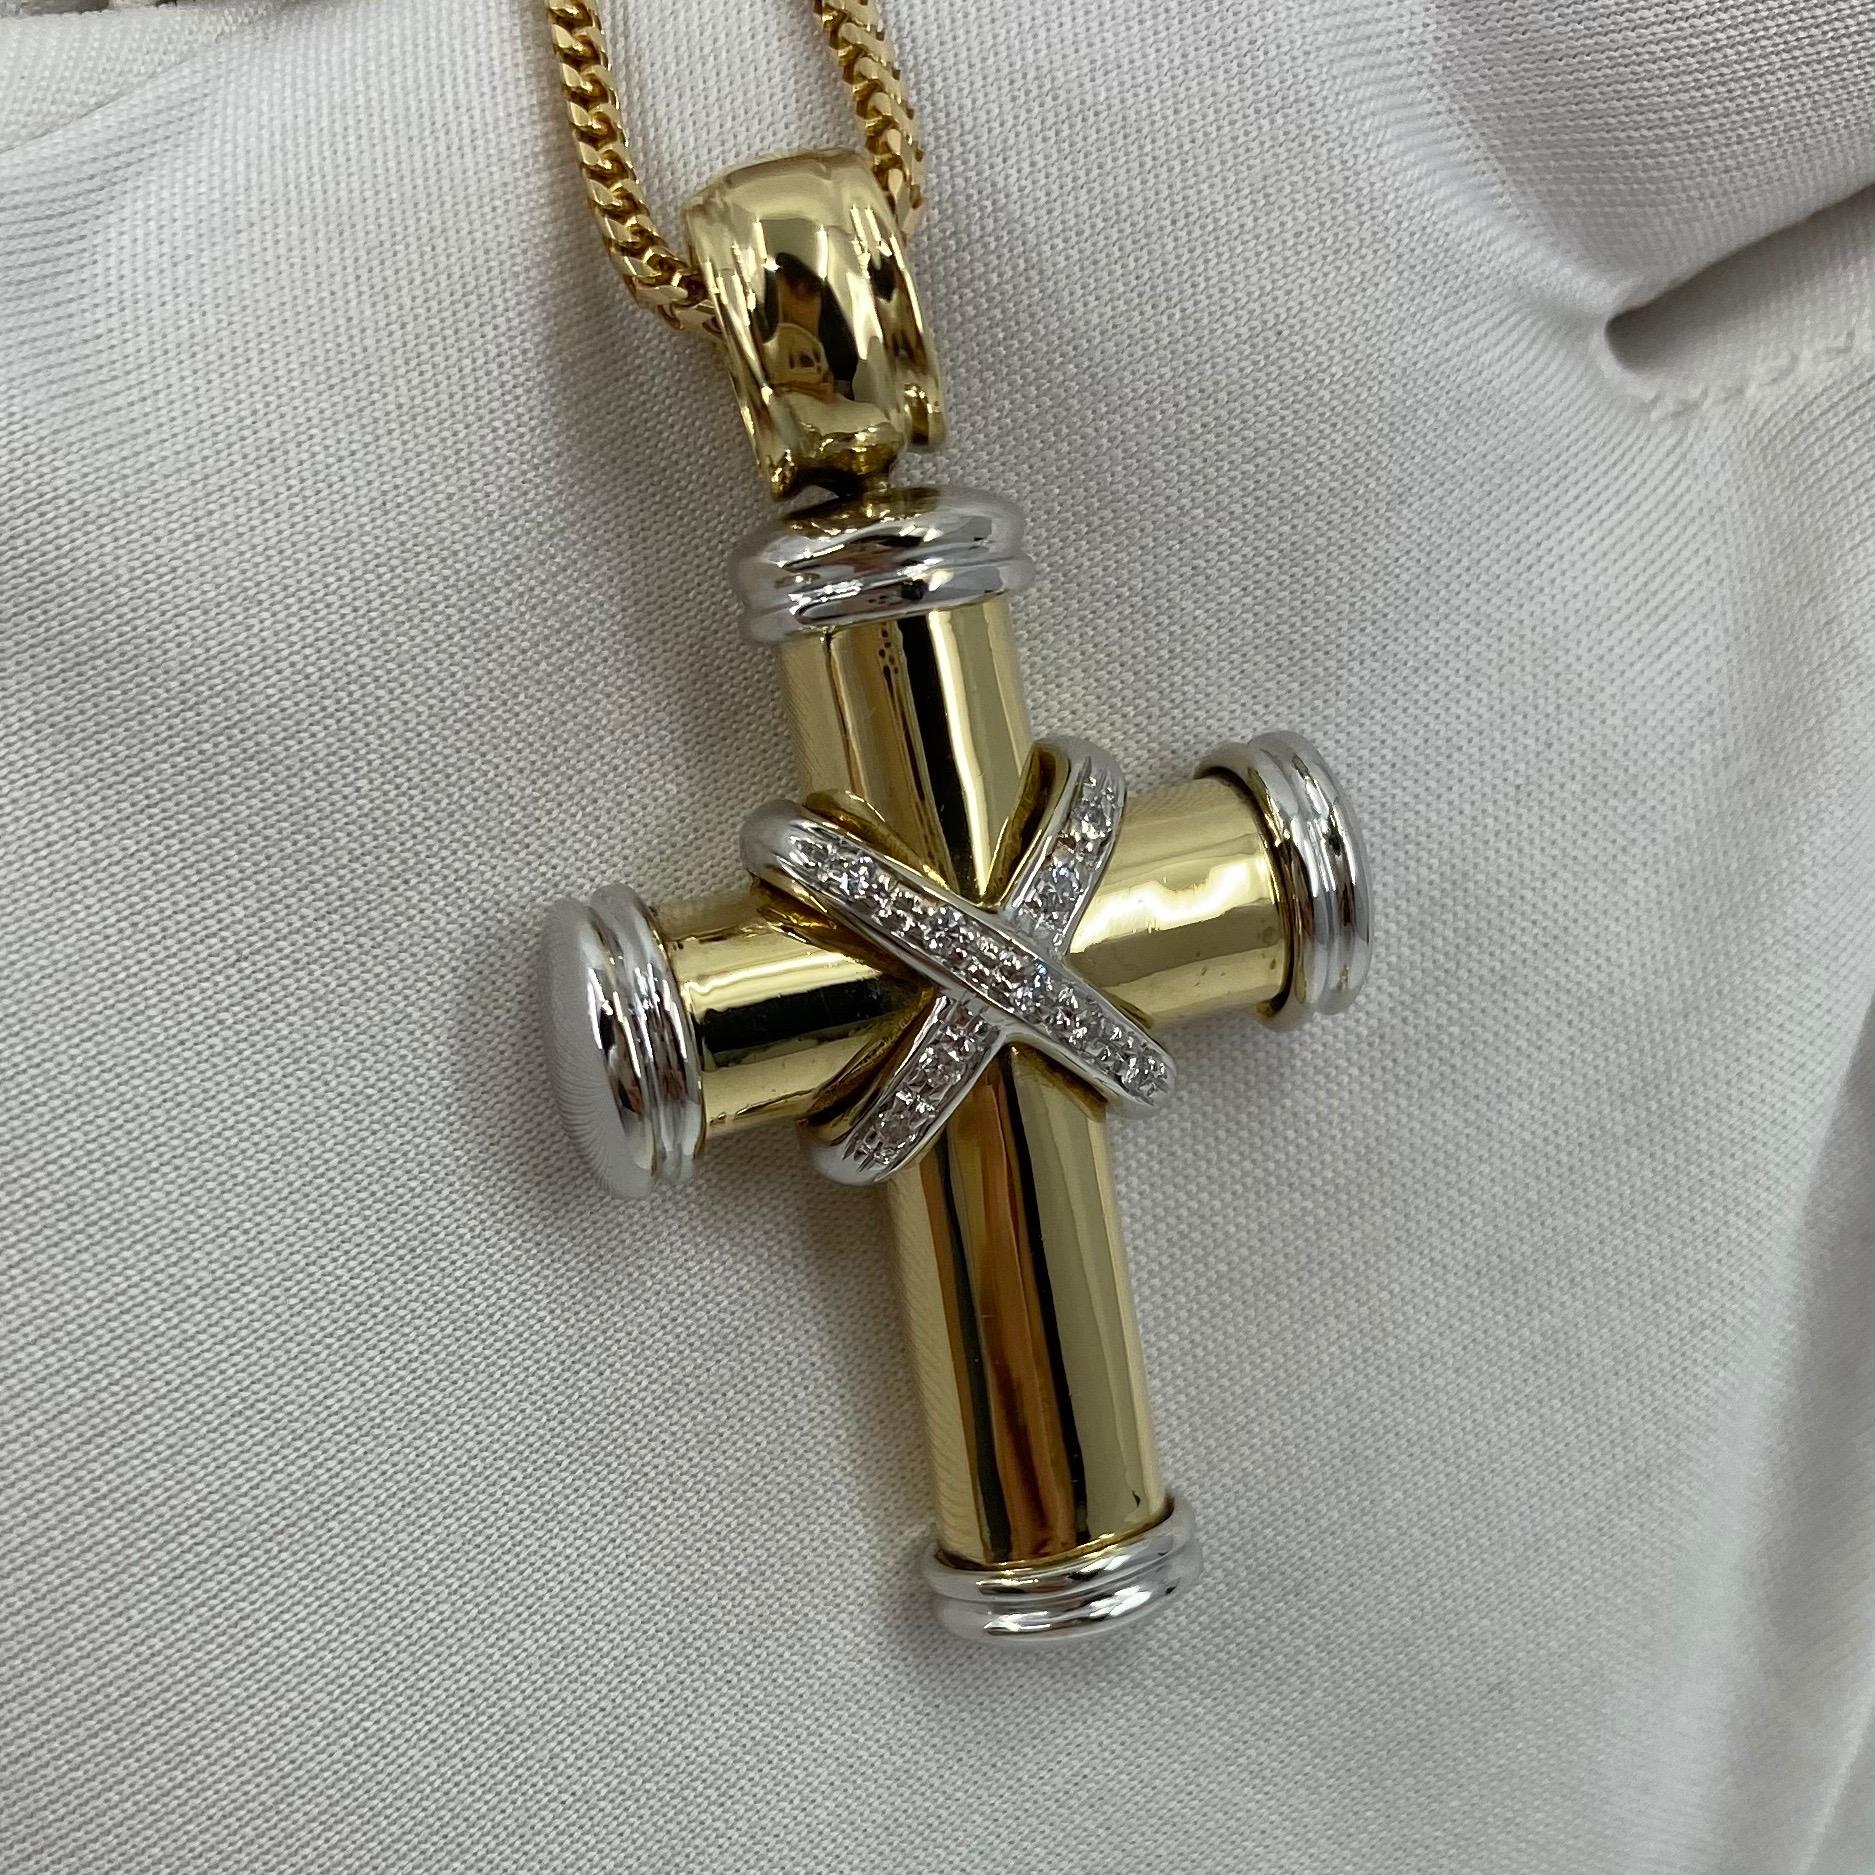 Theo Fennel 18 Karat Yellow & White Gold Diamond Cross Pendant Necklace.

Theo Fennel is a prominent and talented British designer, famed for collections such as his 'cross' designs.
This is a stunning yellow & white gold cross set with diamonds.